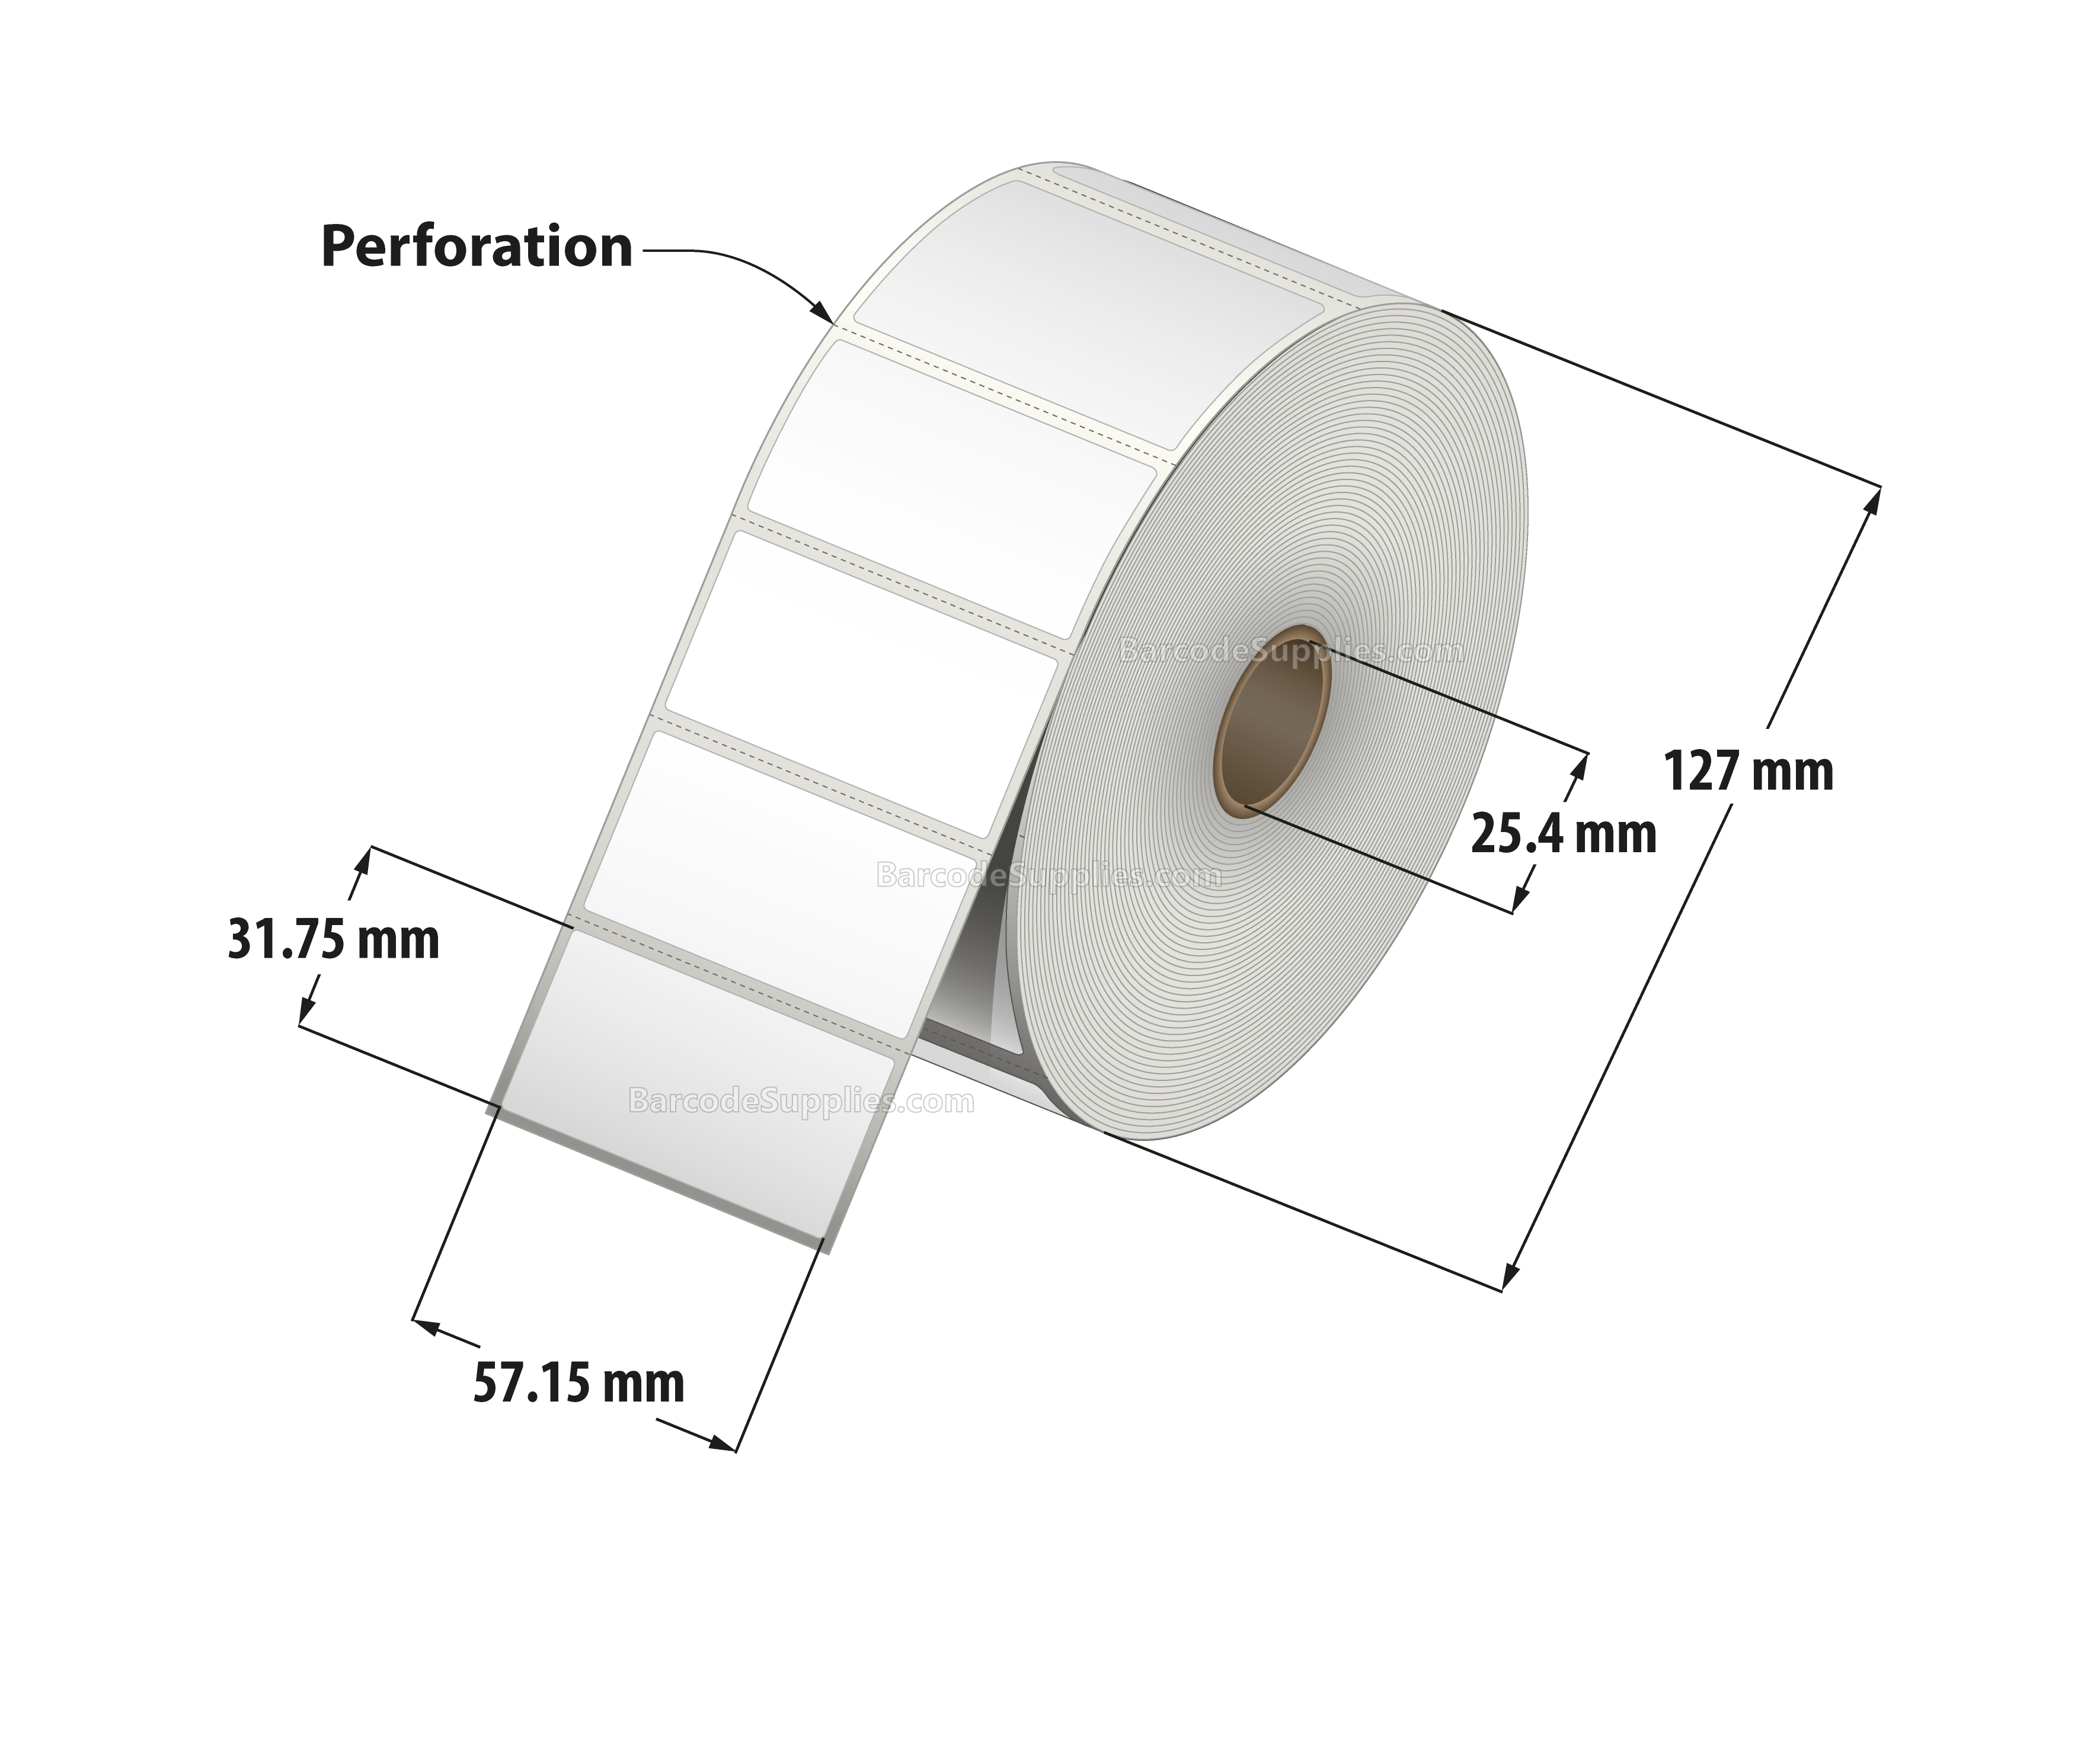 2.25 x 1.25 Thermal Transfer White Labels With Permanent Adhesive - Perforated - 2100 Labels Per Roll - Carton Of 12 Rolls - 25200 Labels Total - MPN: RT-225-125-2100-1 - BarcodeSource, Inc.